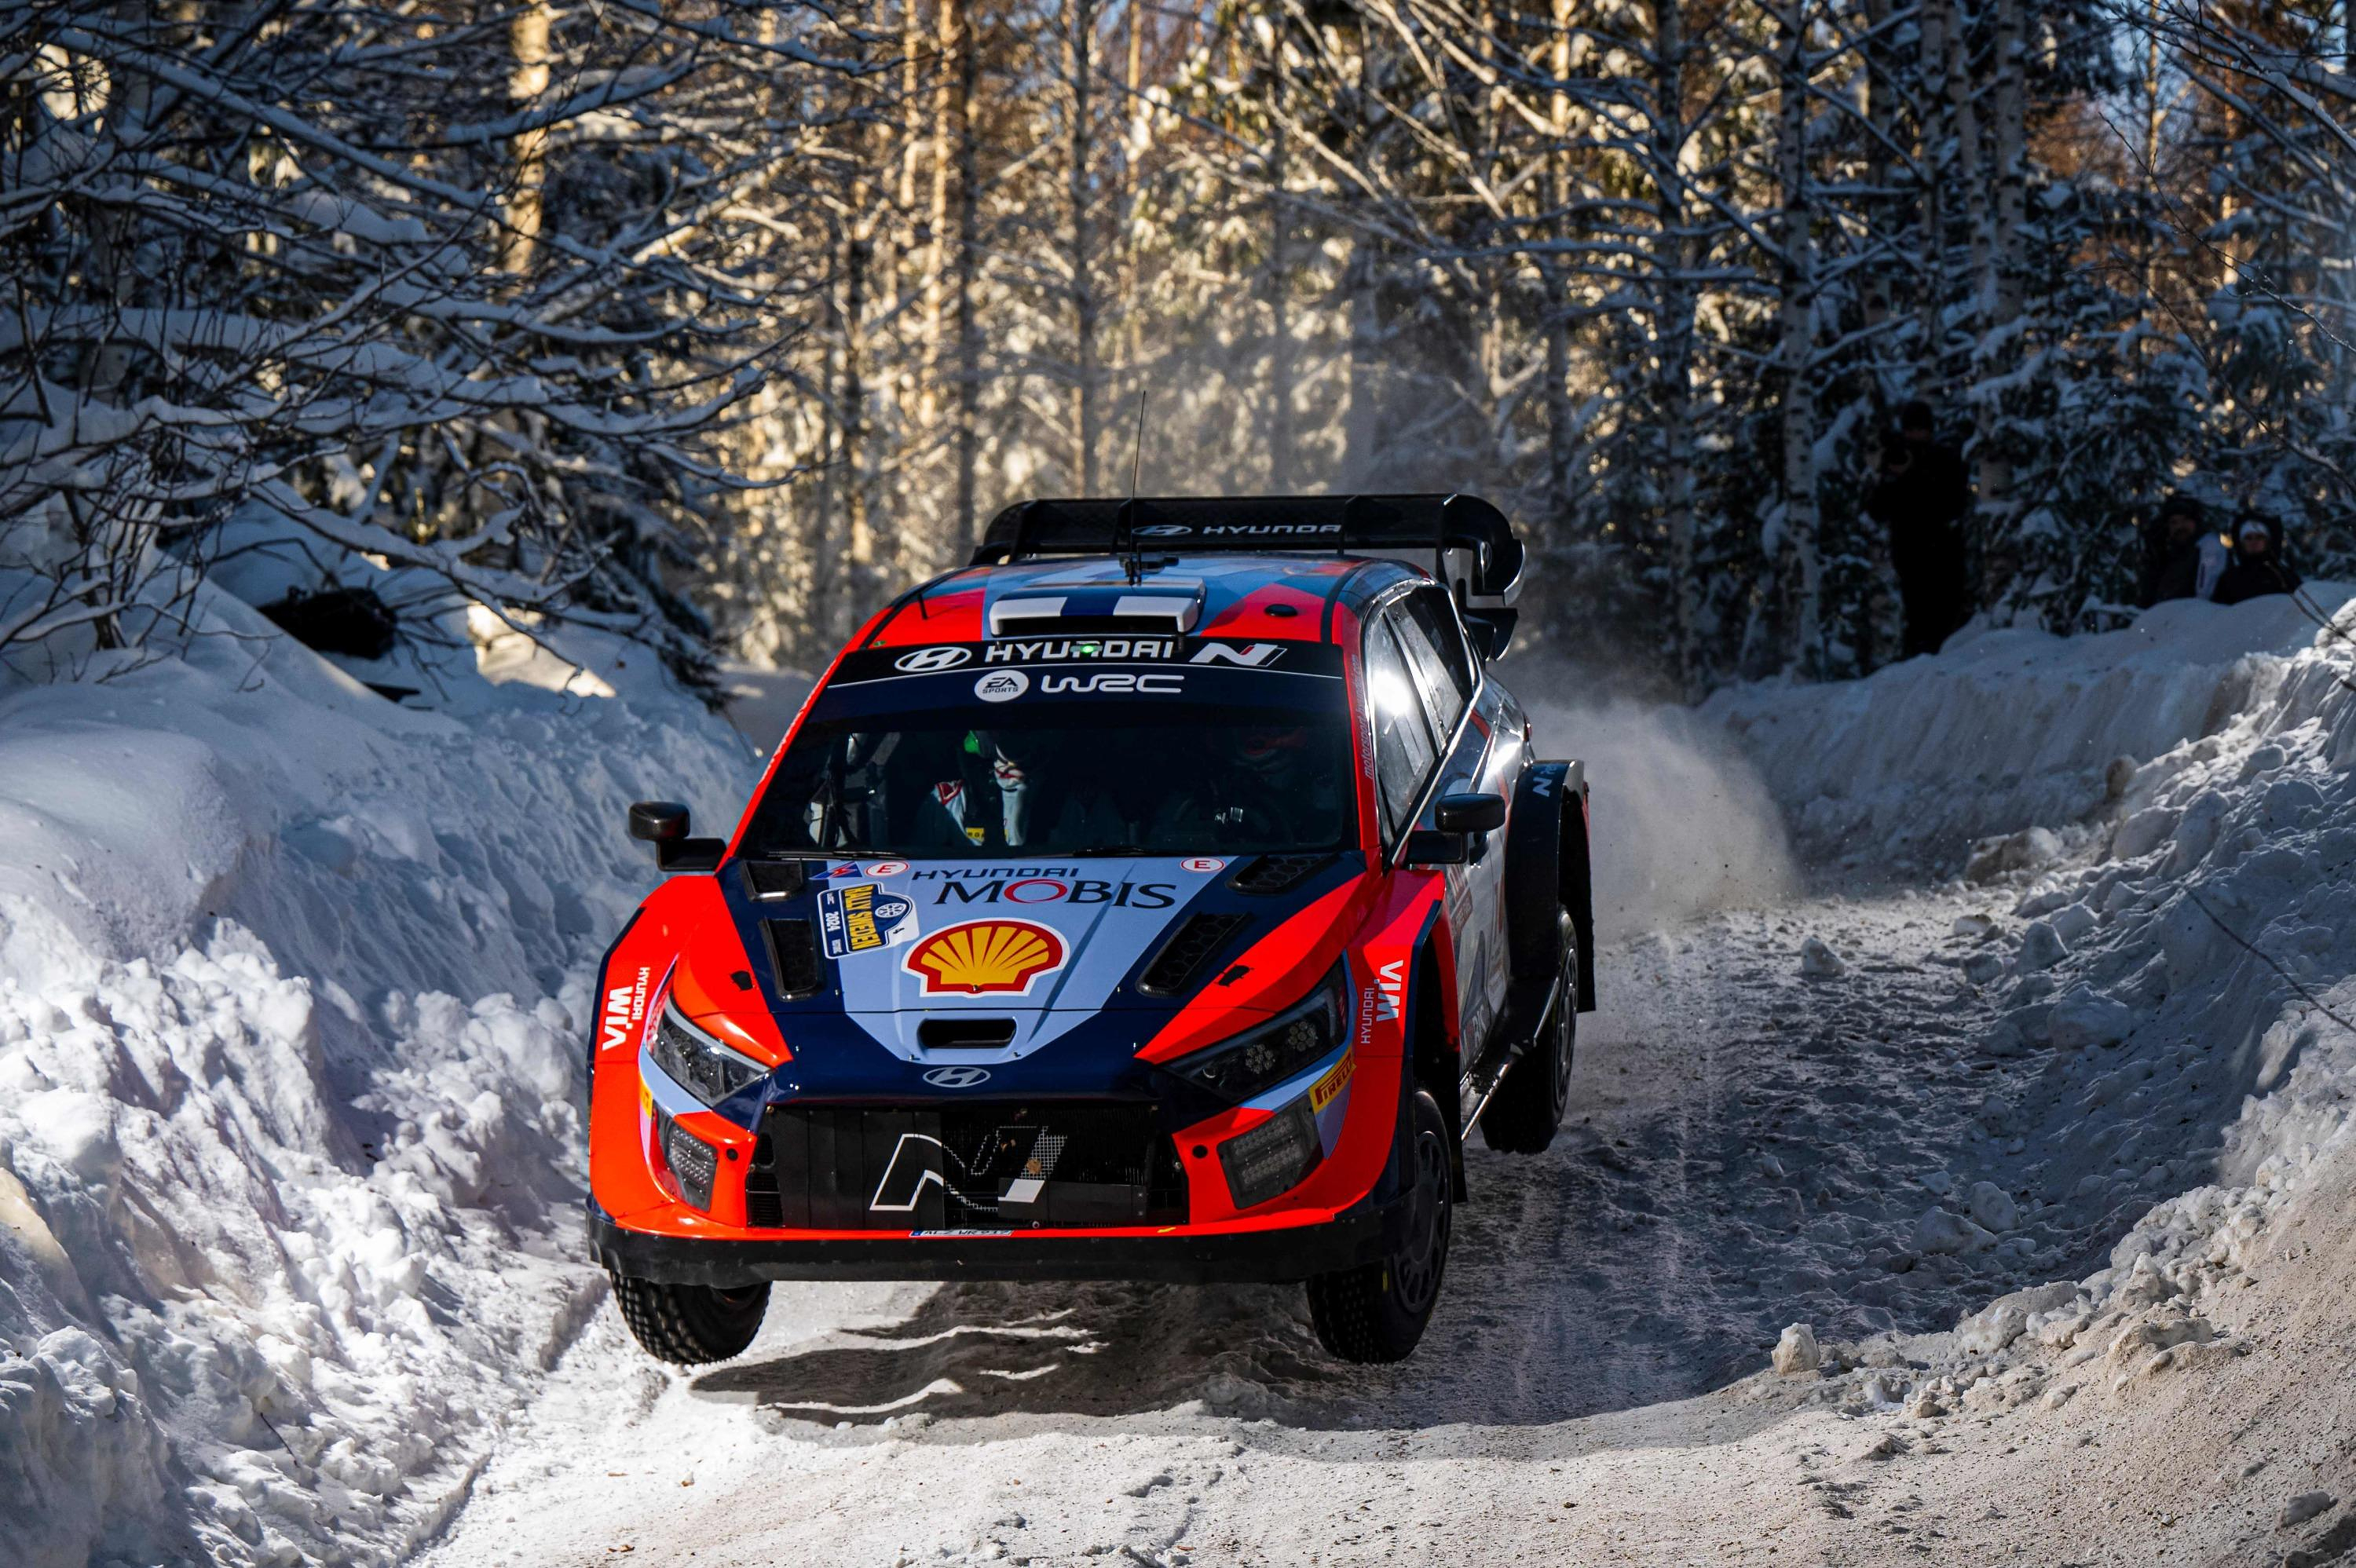 WRC: Lappi close to victory, Fourmaux second during the Swedish rally